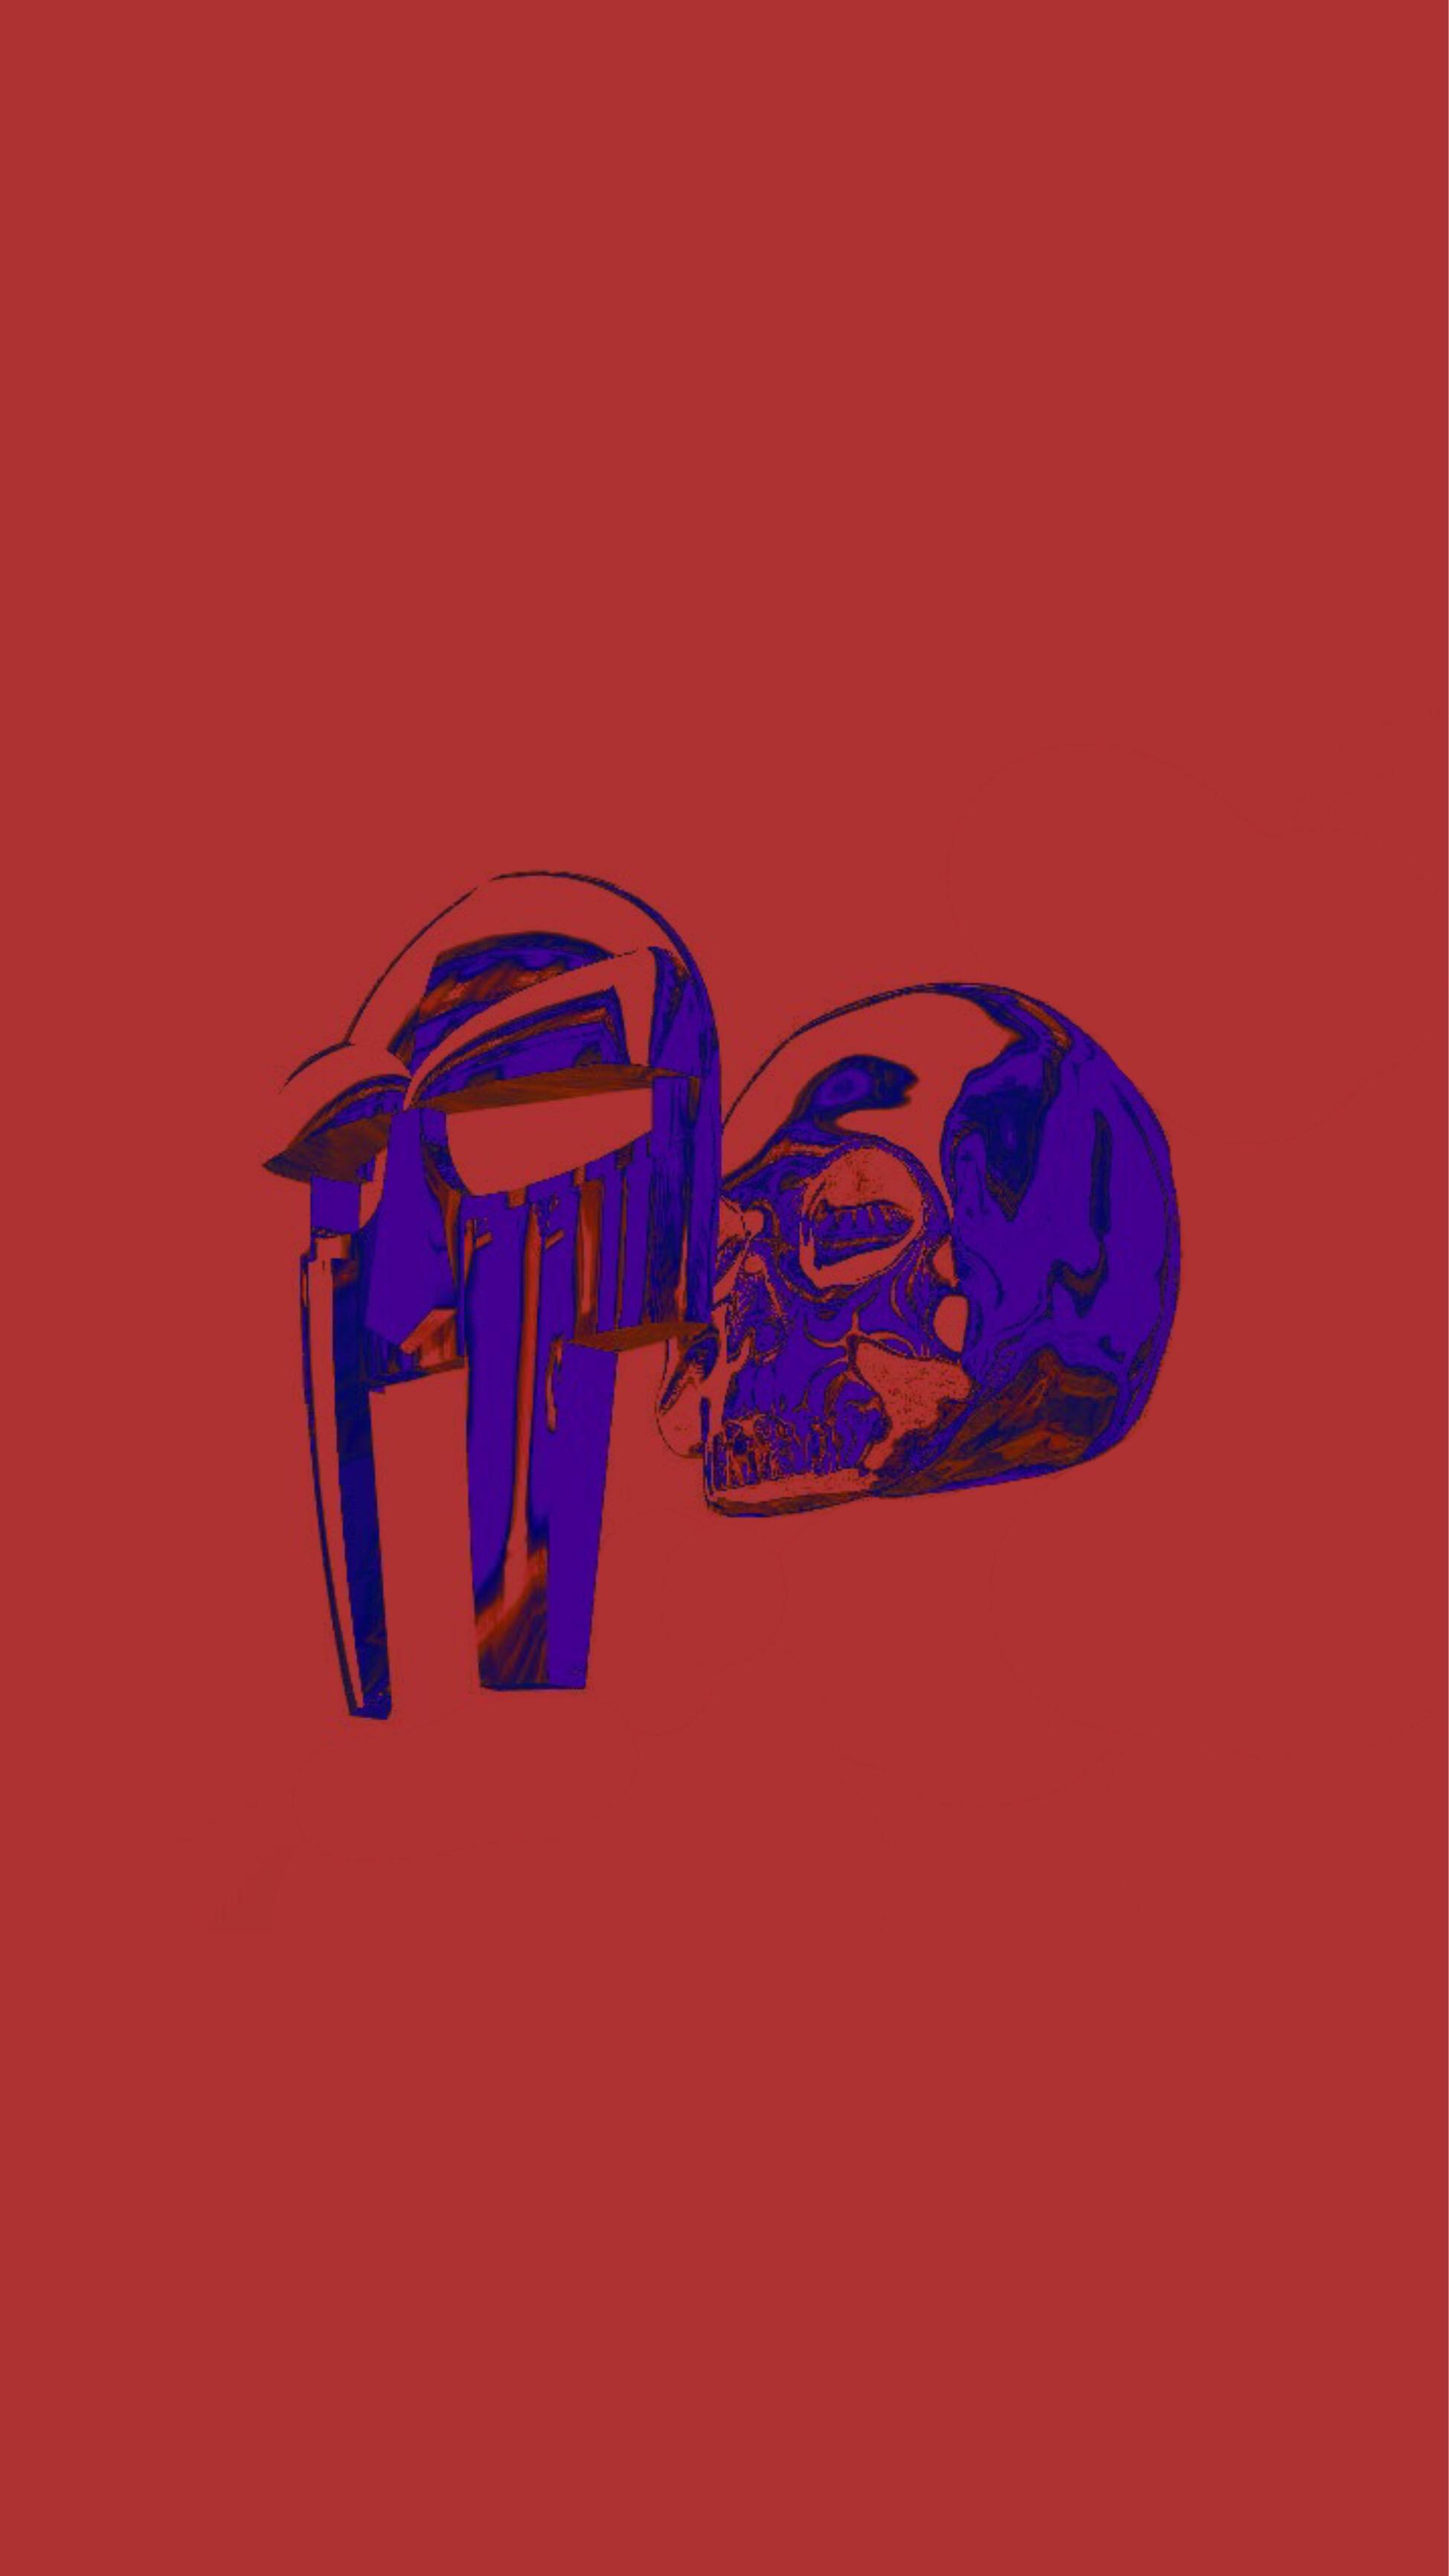 Just finished making these MF DOOM Wallpaper. Let me know